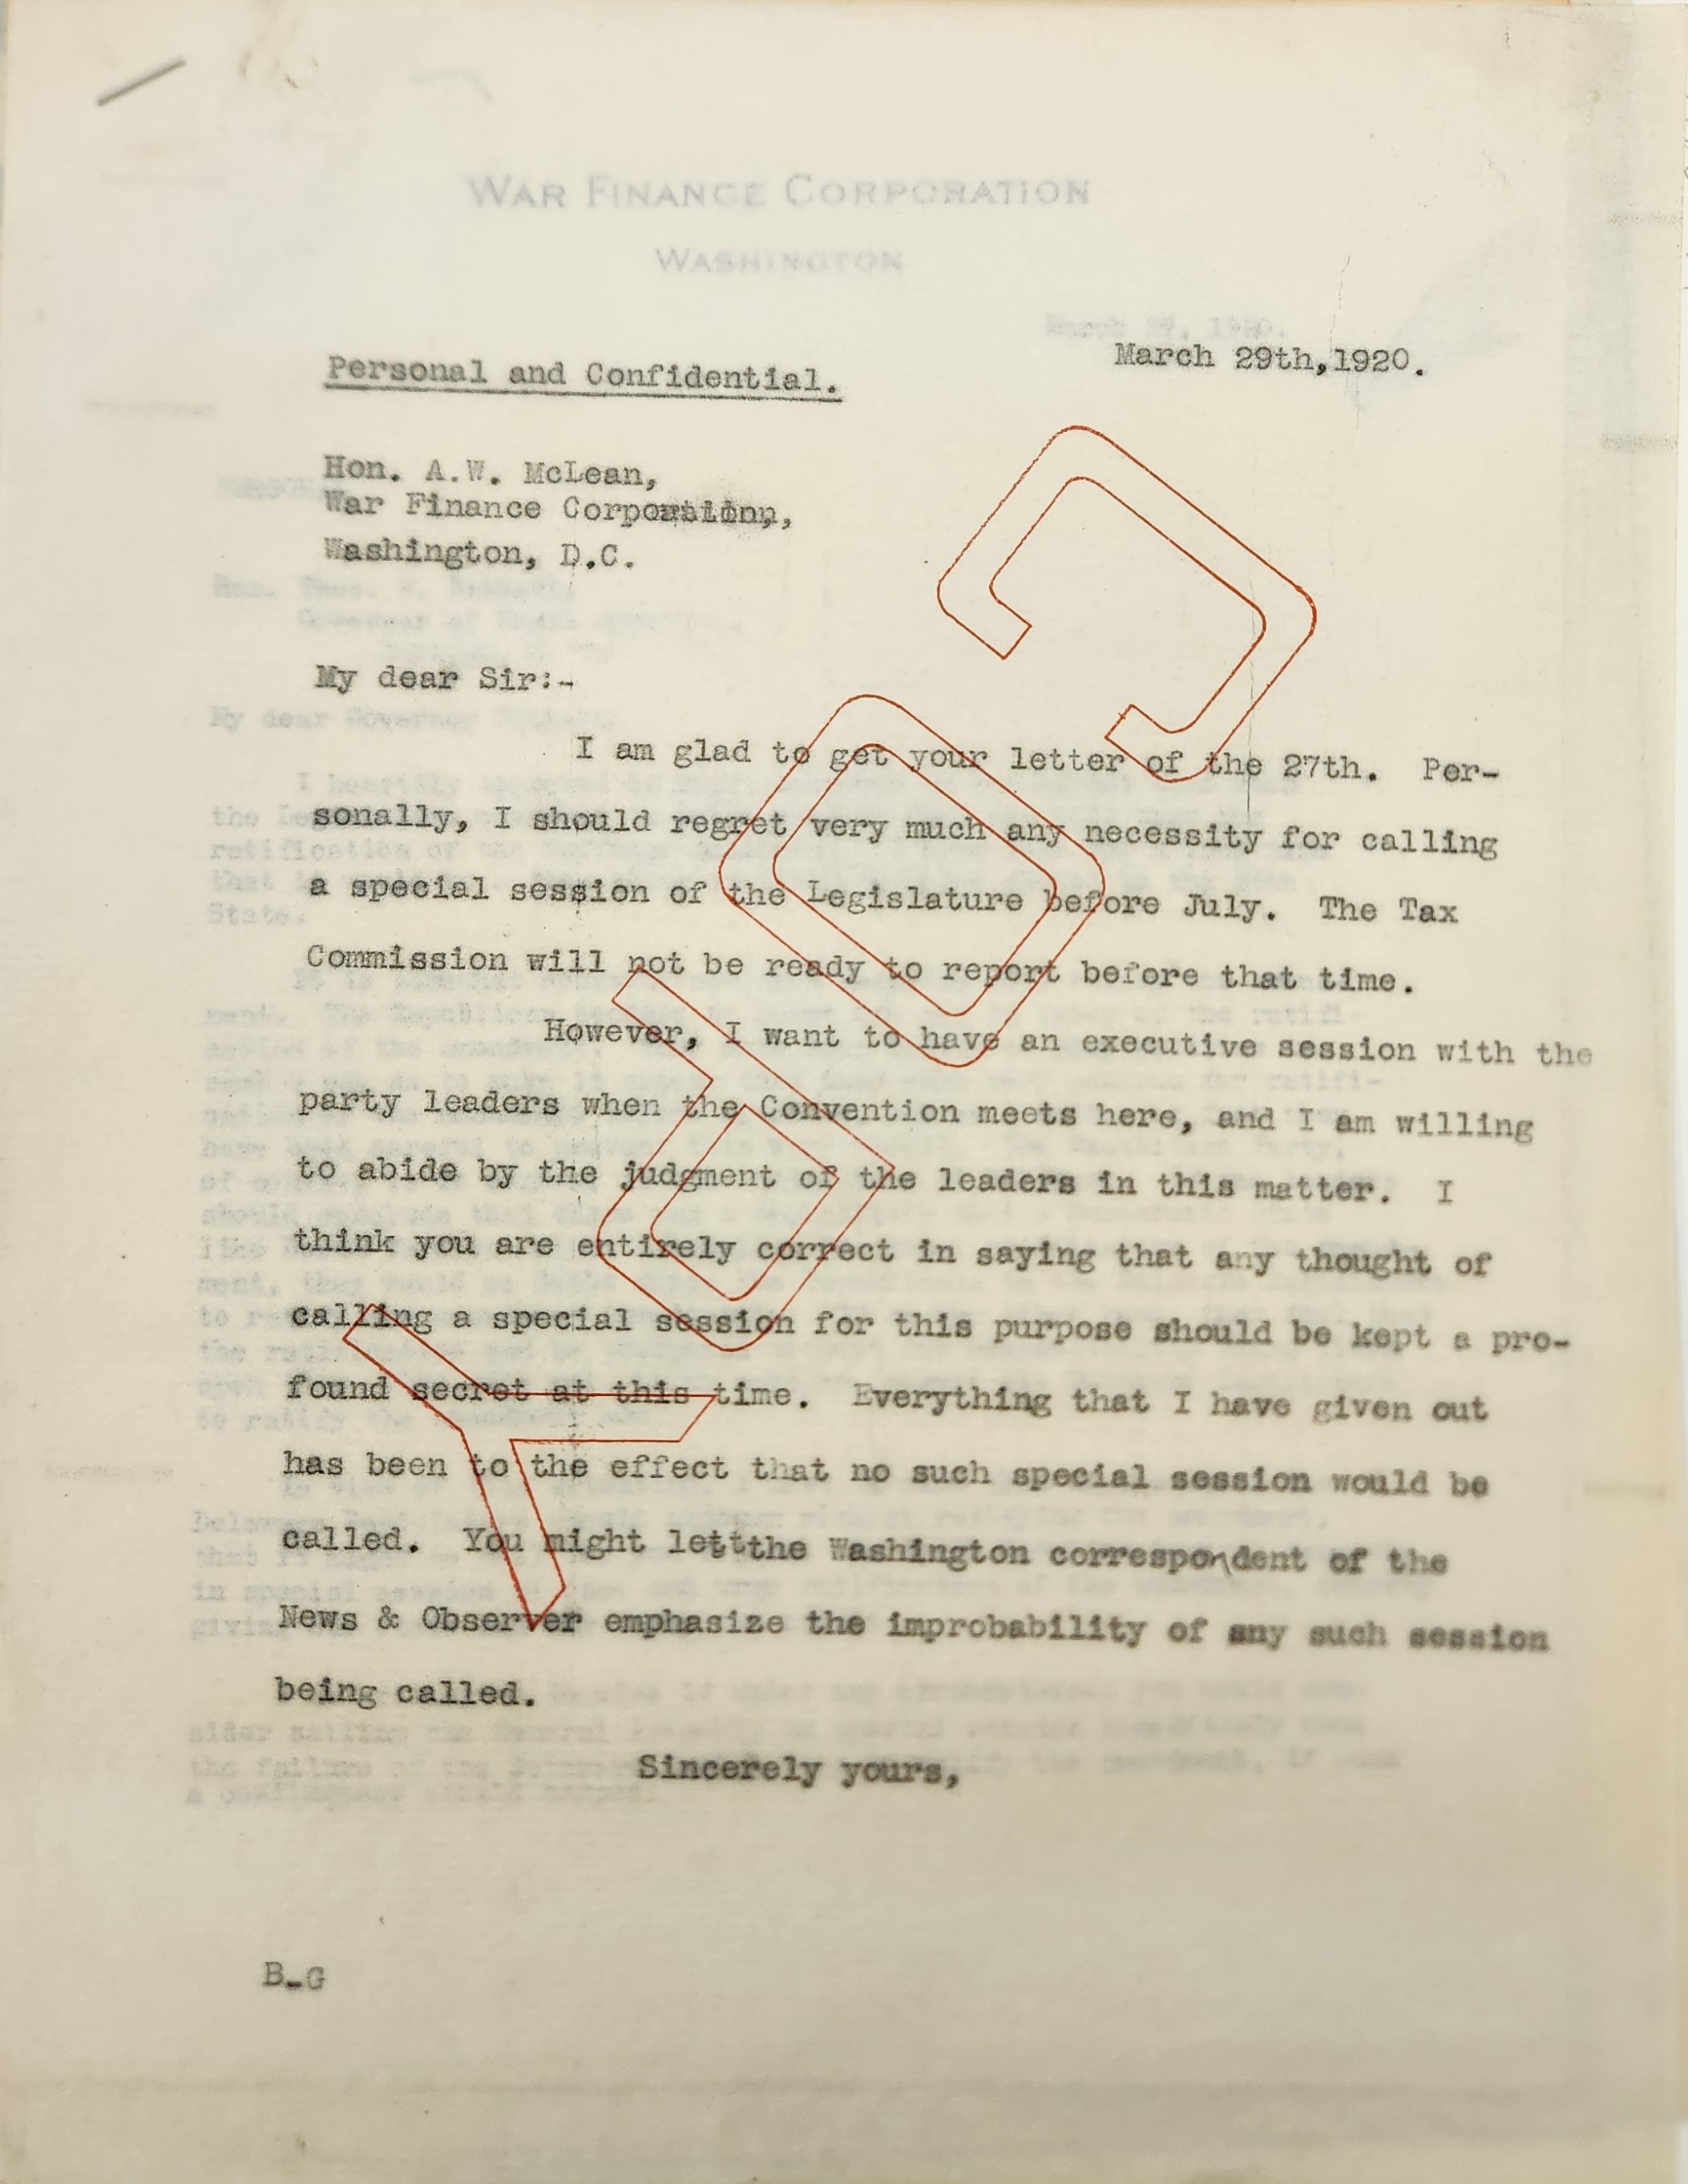 Letter from Bickett to McLean, March 29, 1920